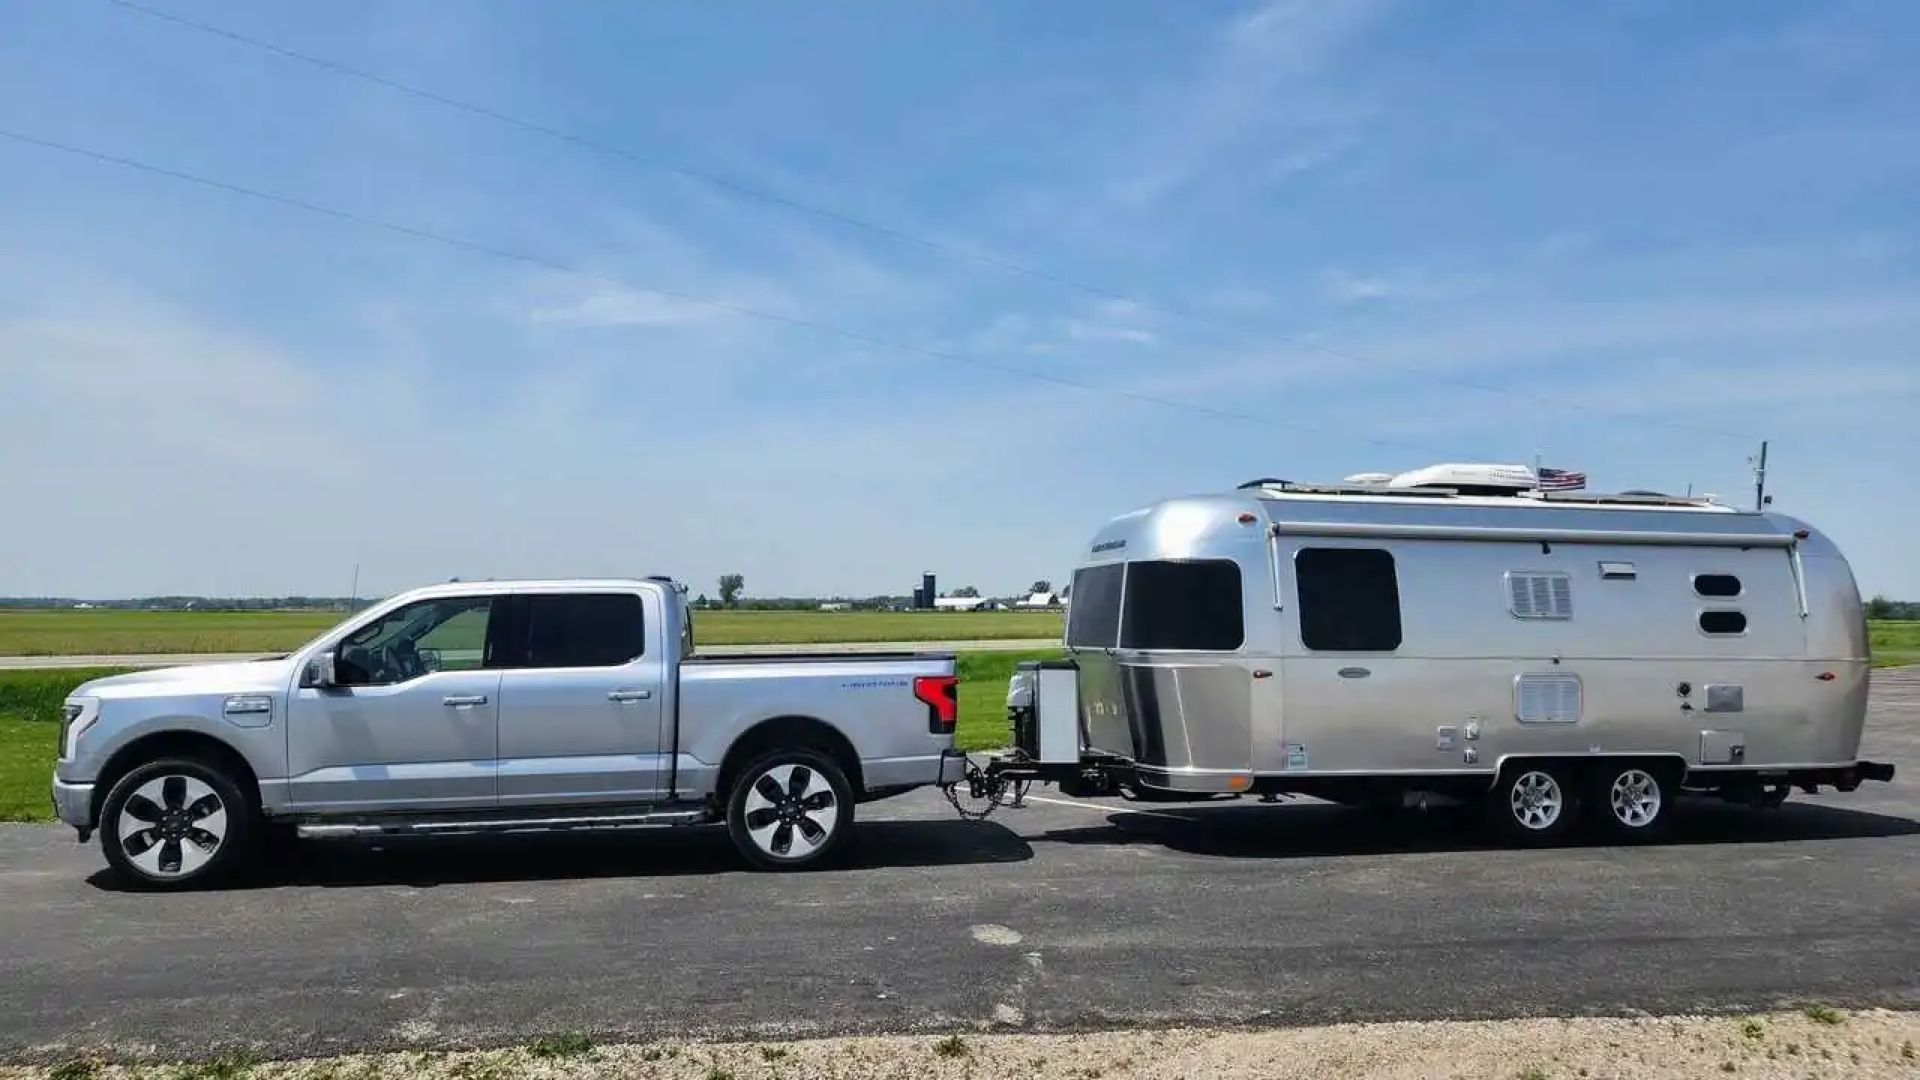 F-150 Lightning towing an Airstream trailer